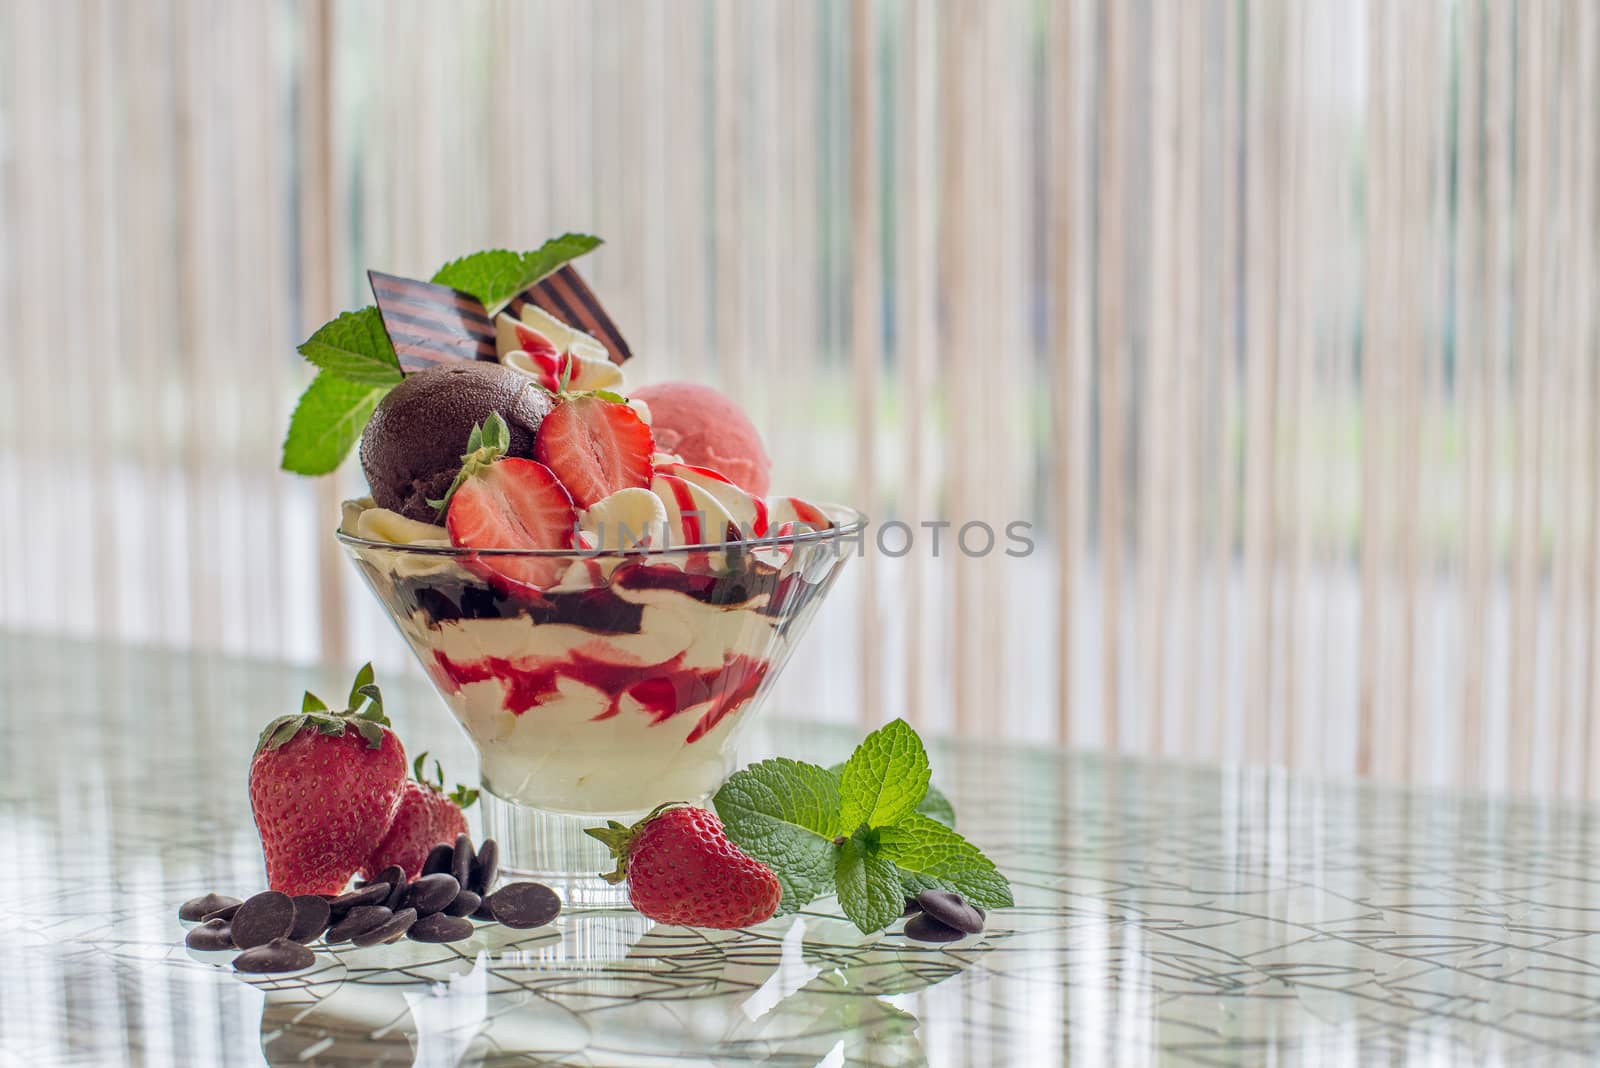 Delicious strawberry dessert with mint and chocolate by Maurycy14